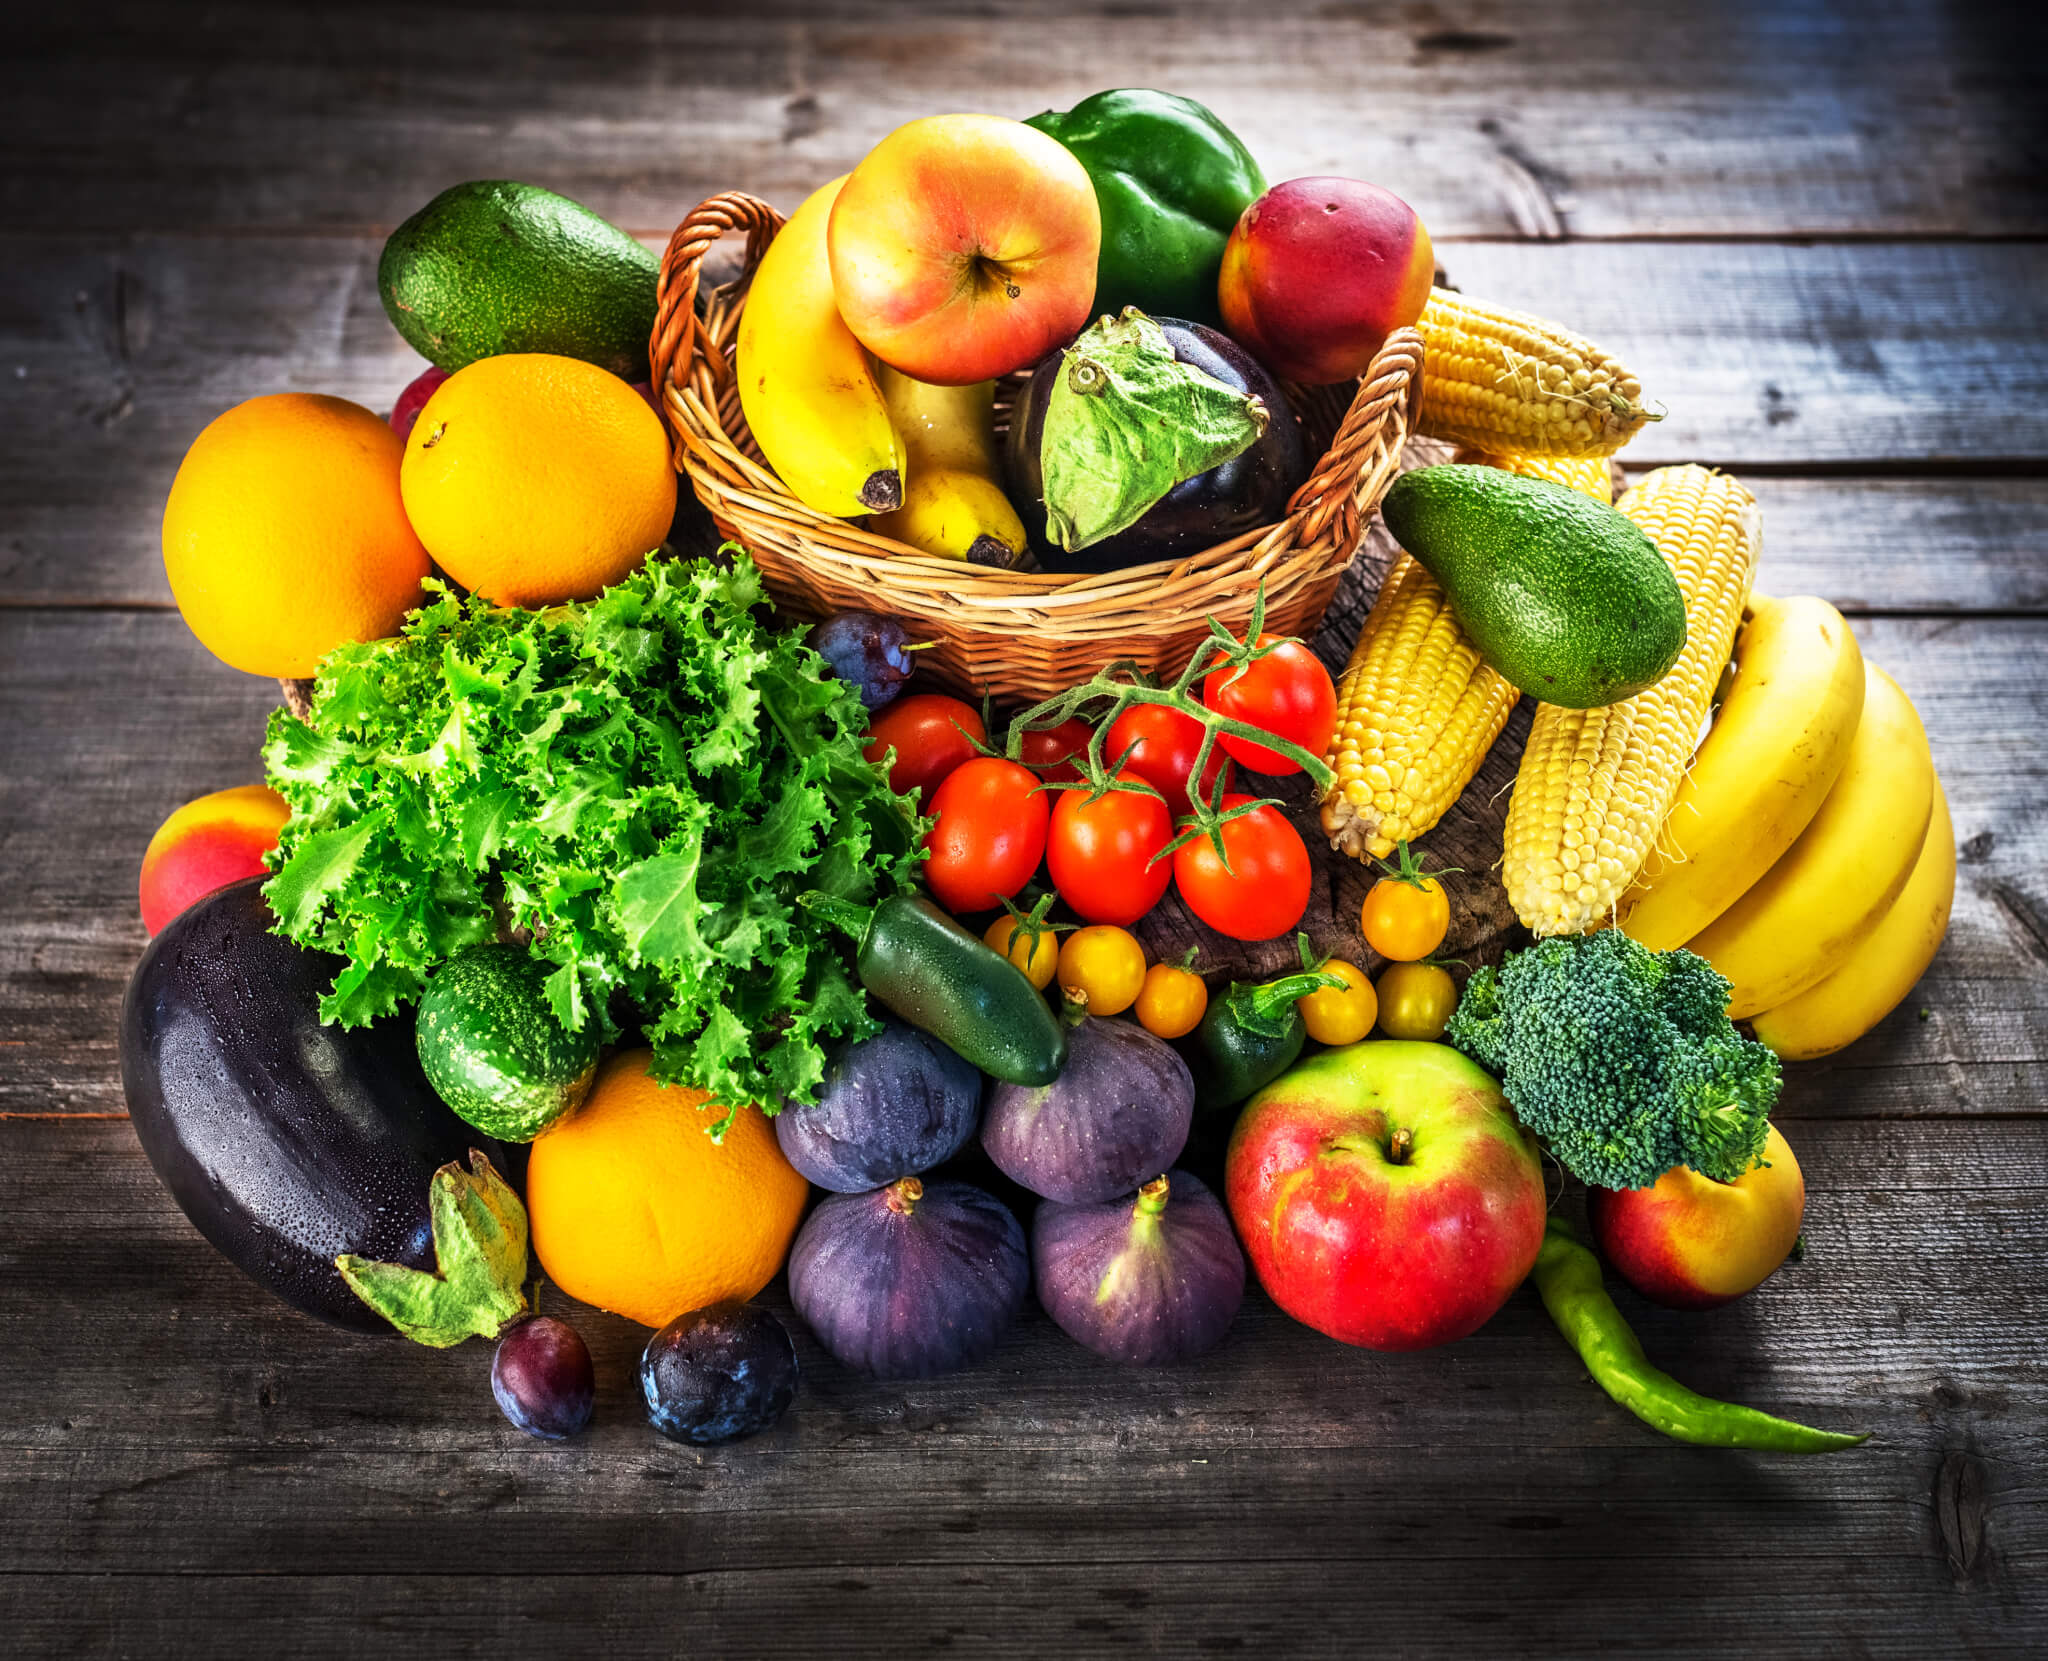 why eat fruits and vegetables